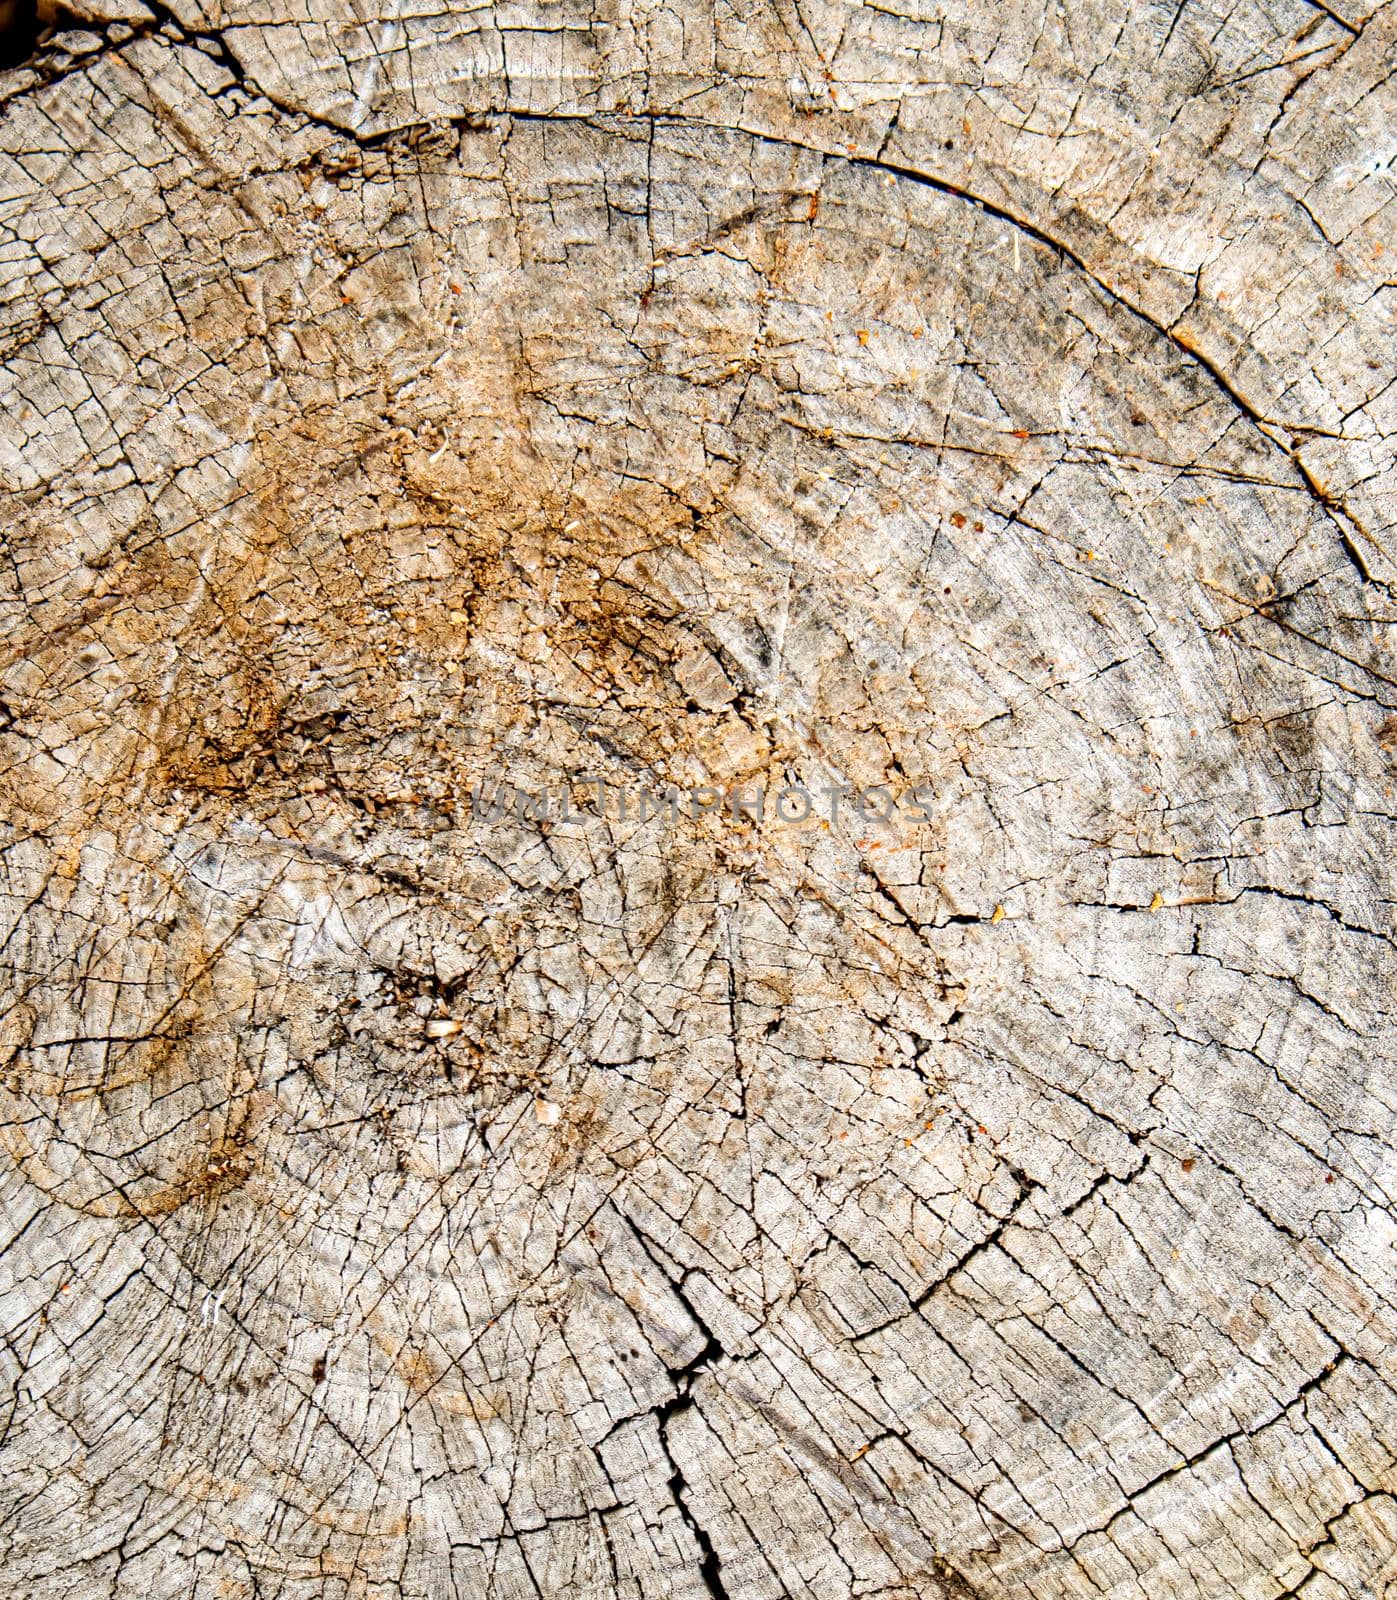 Top view of the texture of an old cracked stump, vintage wooden background, close-up.